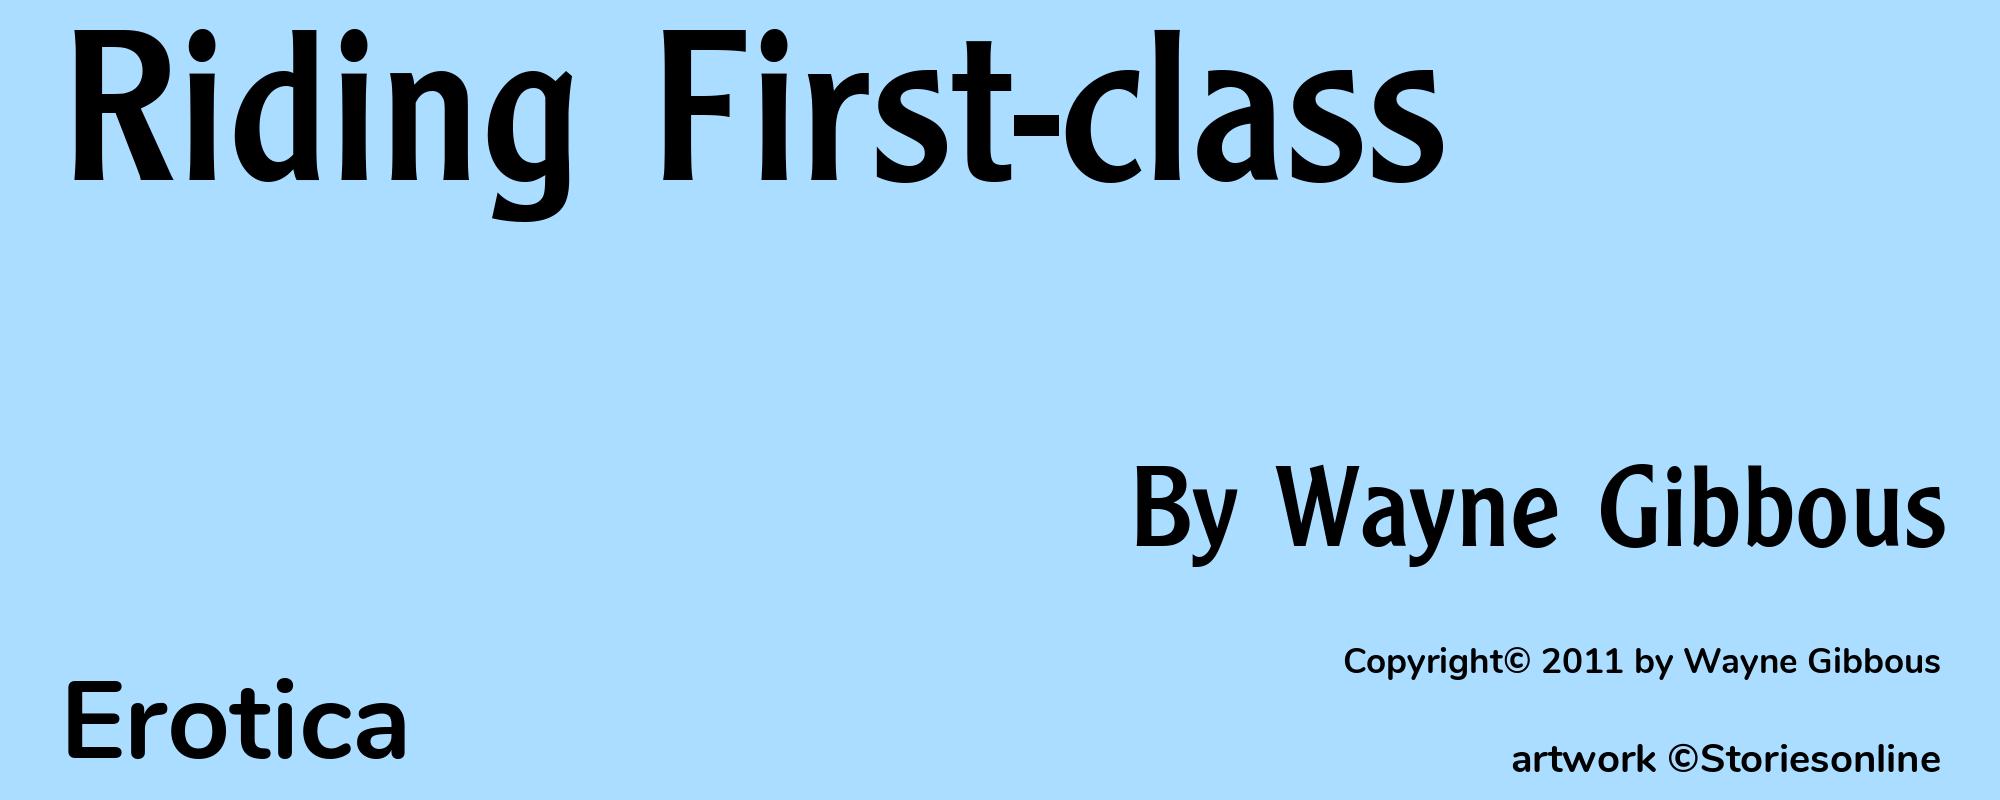 Riding First-class - Cover